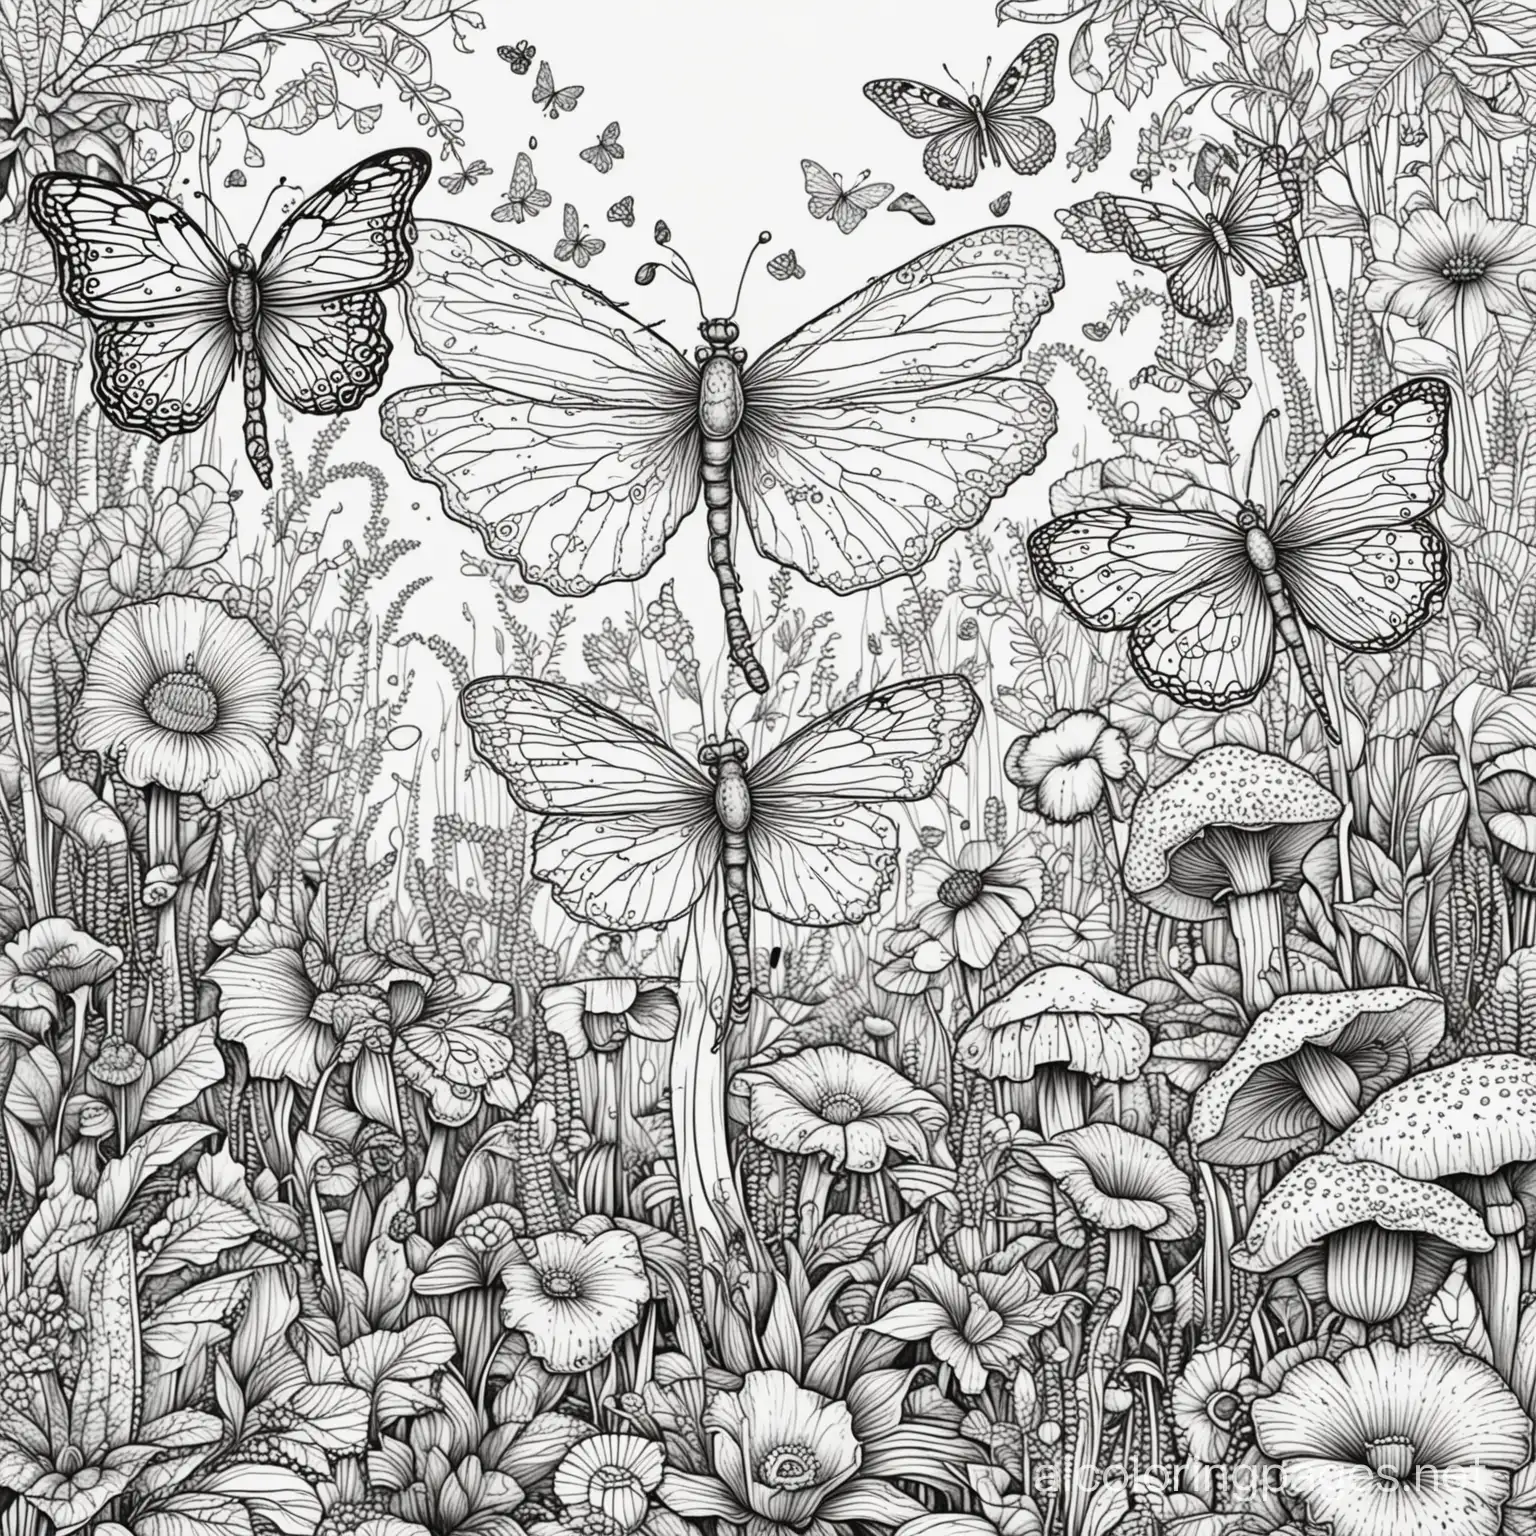 trippy mushrooms and flowers with butterflies and dragon flies, Coloring Page, black and white, line art, white background, Simplicity, Ample White Space. The background of the coloring page is plain white to make it easy for young children to color within the lines. The outlines of all the subjects are easy to distinguish, making it simple for kids to color without too much difficulty